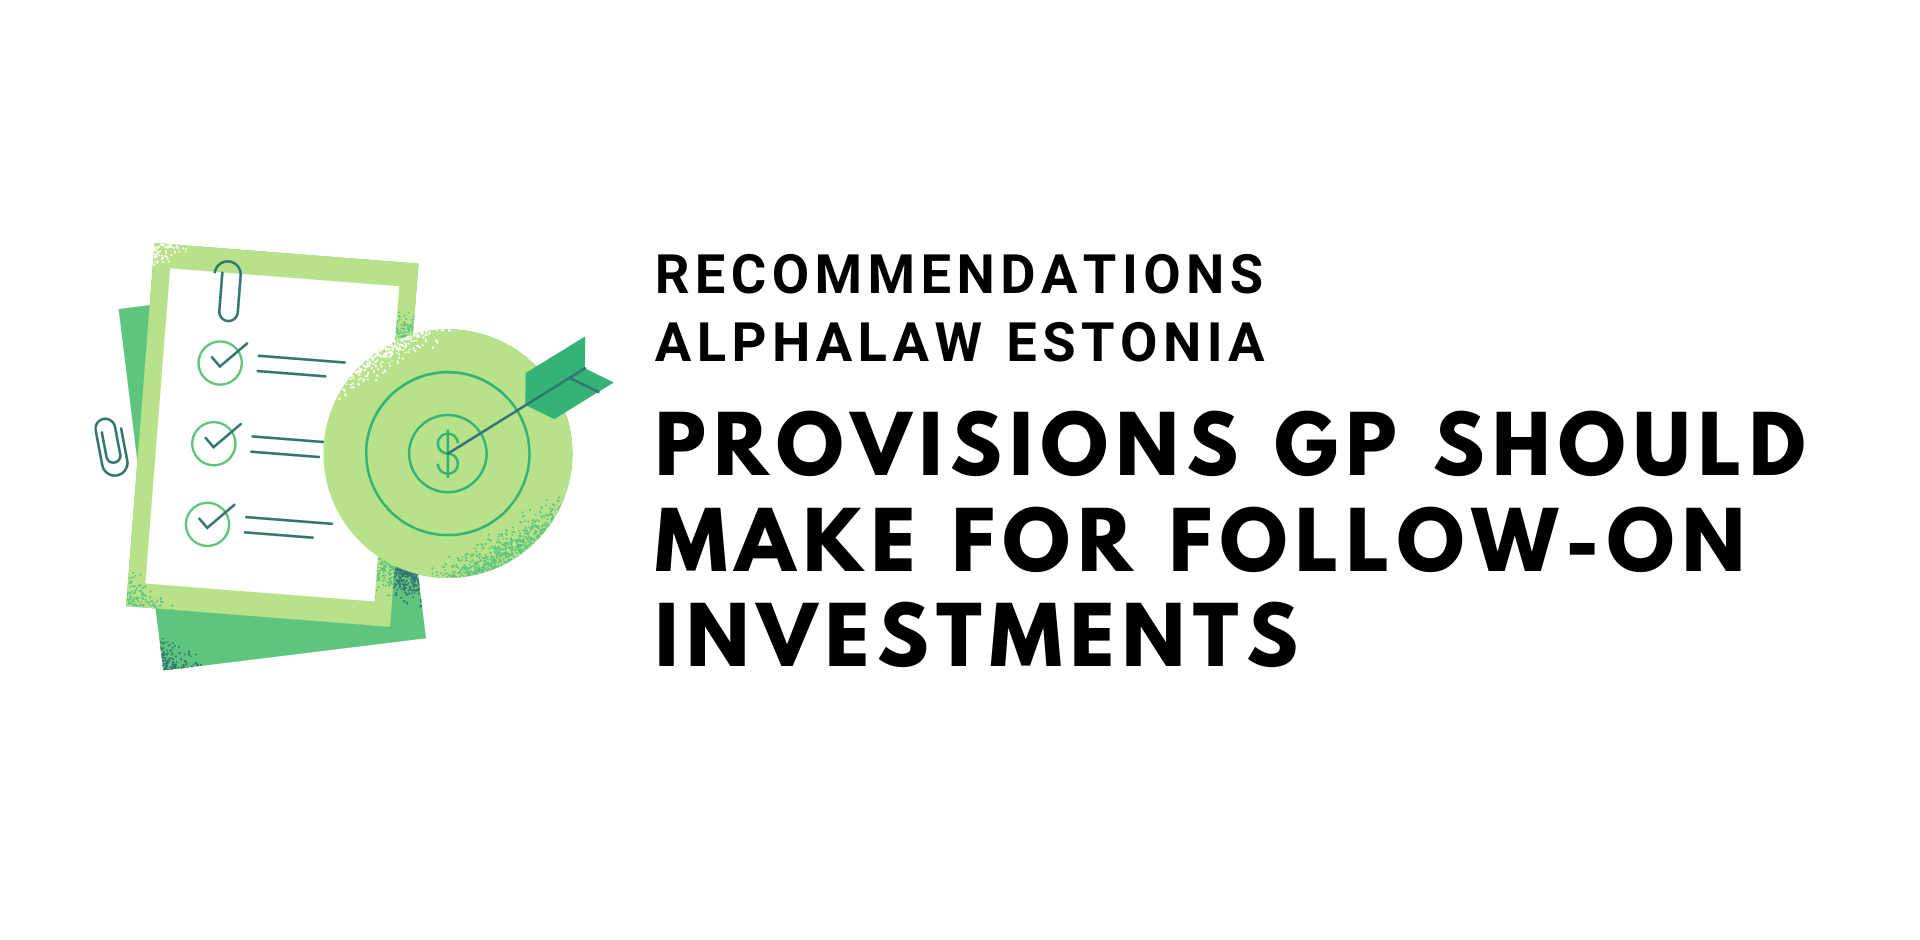 Provisions GP Should Make for Follow-on Investments